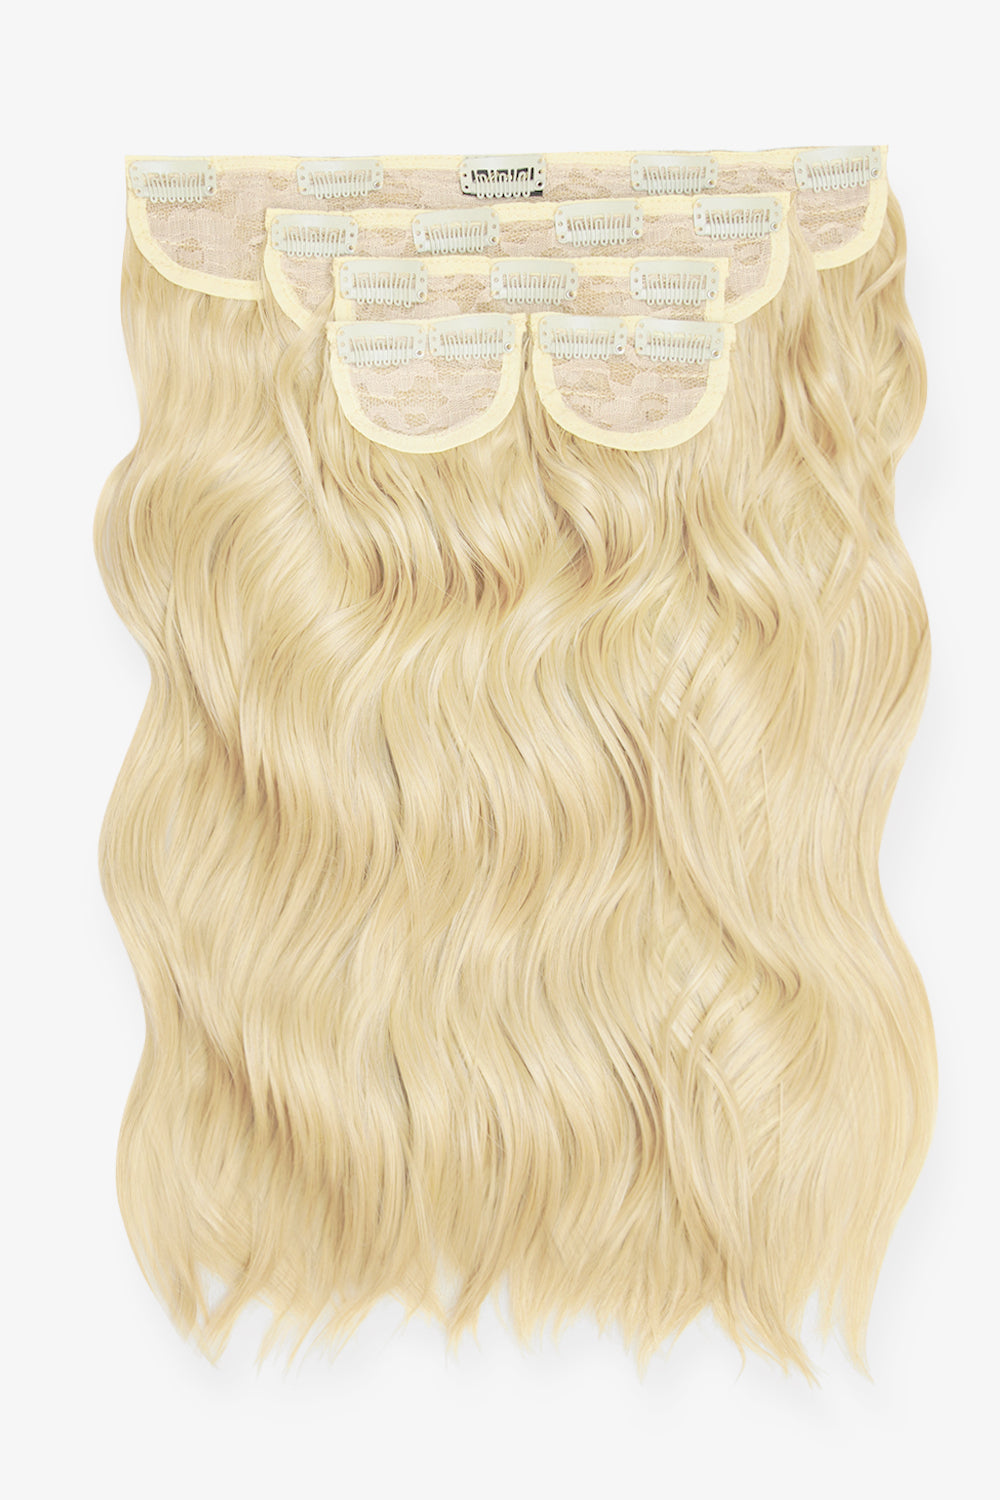 Super Thick 16’’ 5 Piece Brushed Out Wave Clip In Hair Extensions - Pure Blonde